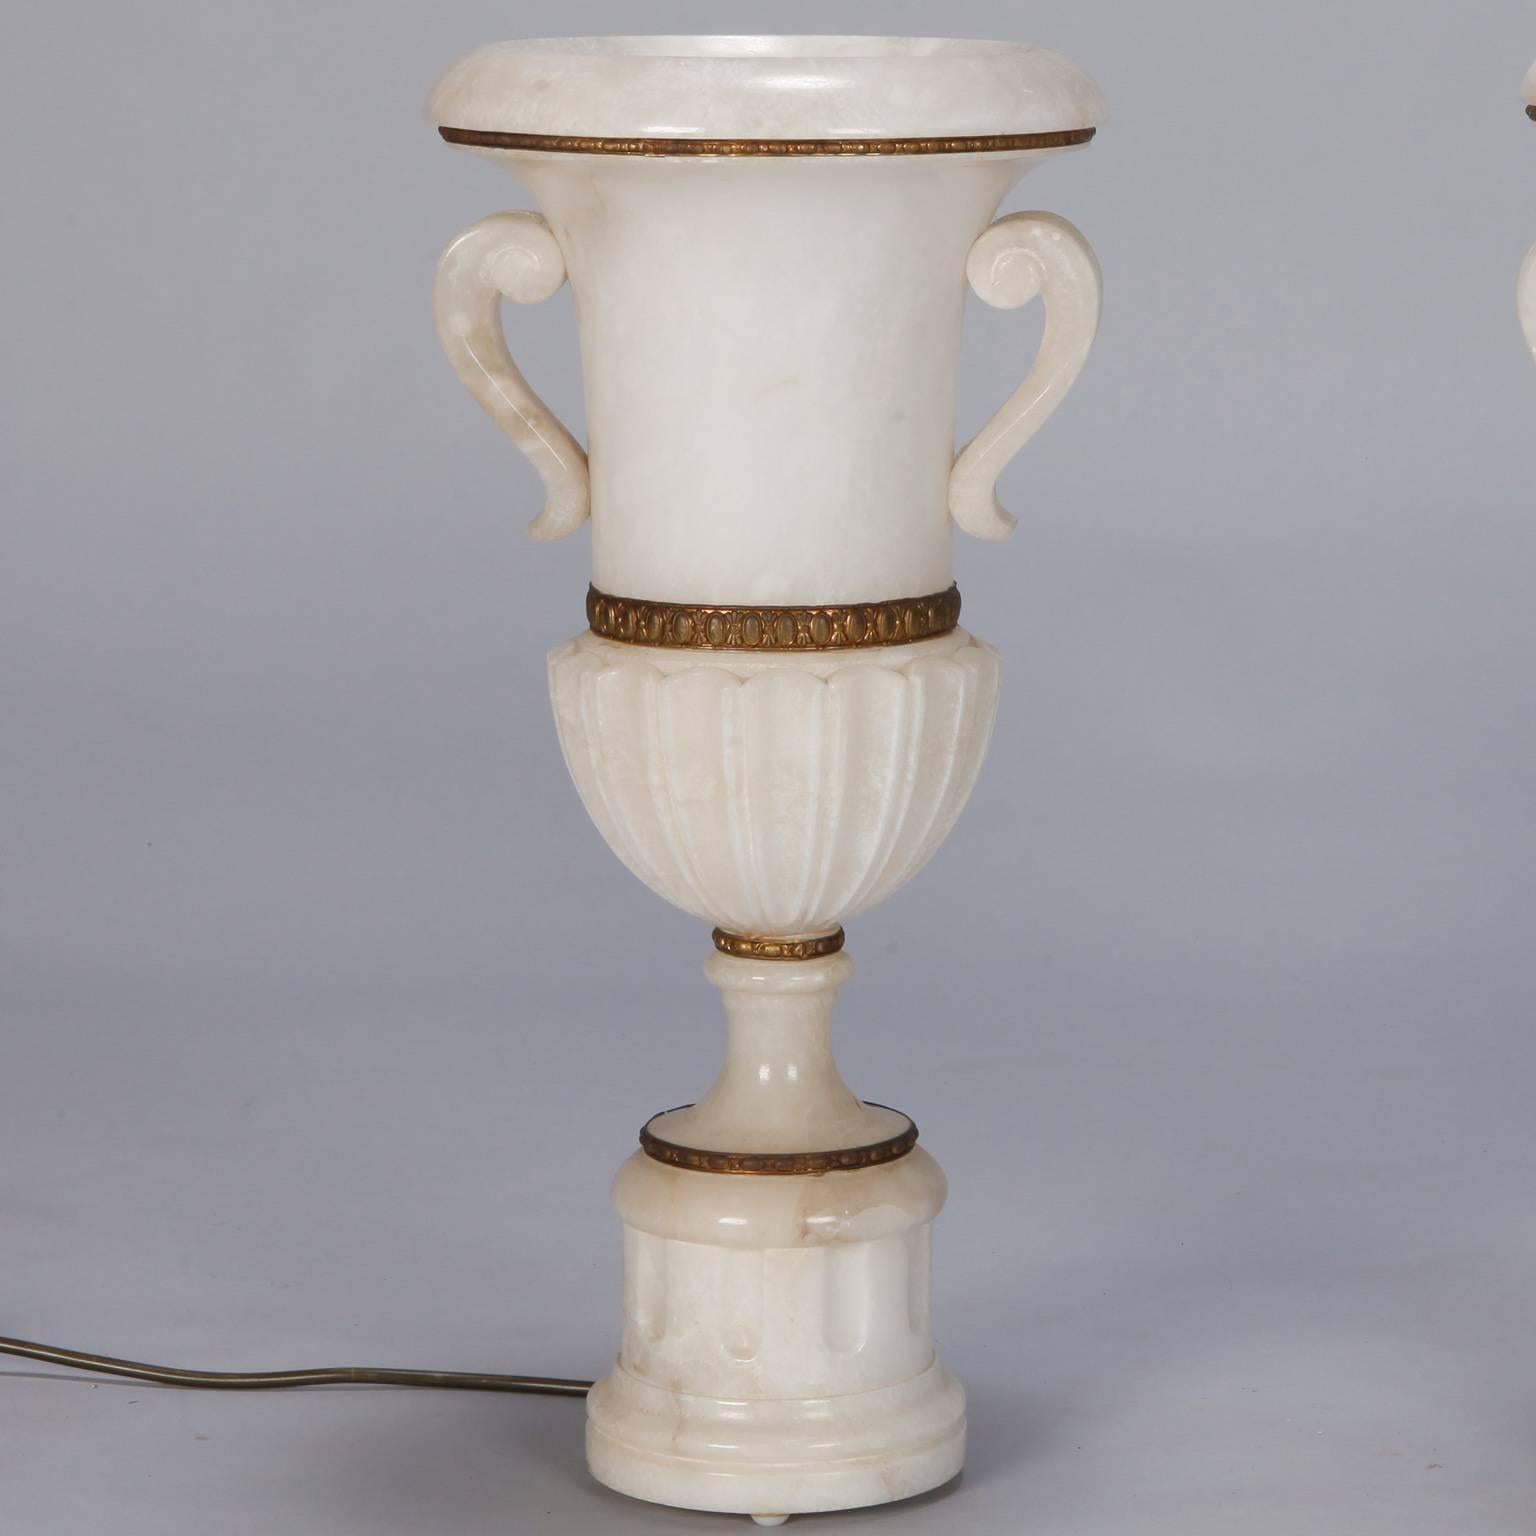 Found in Italy, this pair of, circa 1930s alabaster lamps stand just under 20” tall and feature a Classic urn form with pedestal base, side handles, rounded flared lip and decorative bronze fittings. New wiring for US electrical standards. Sold and